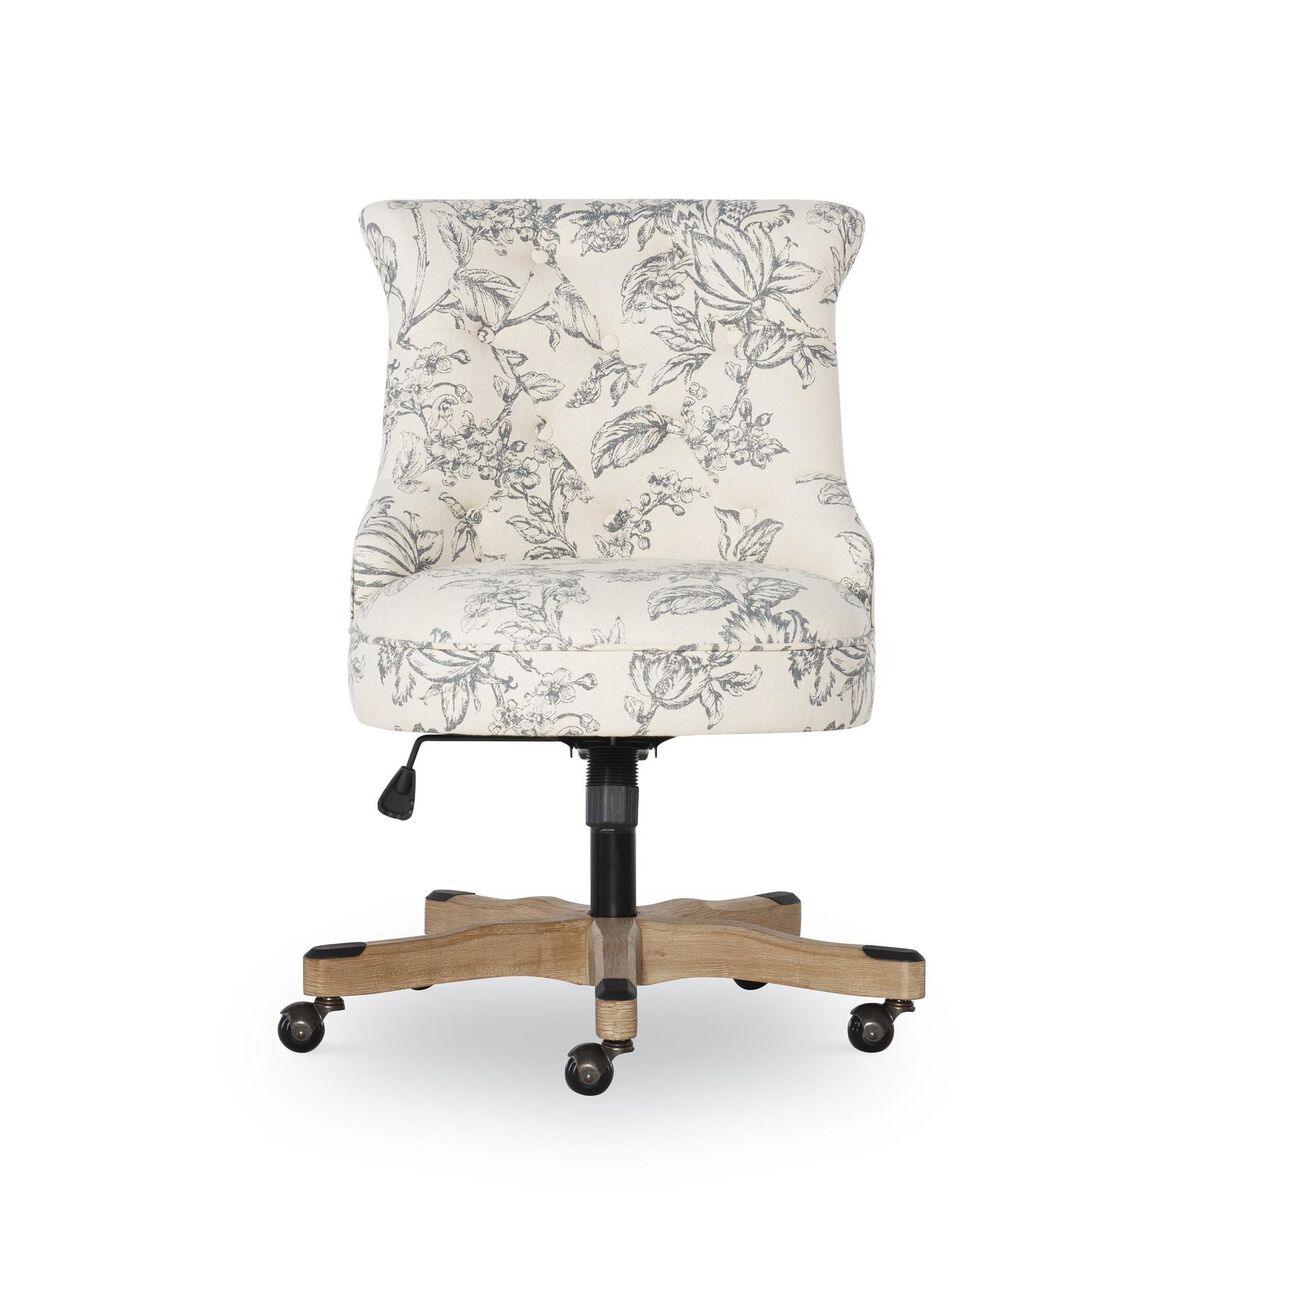 Floral Fabric Upholstered Office Chair with Adjustable Height, White and Gray